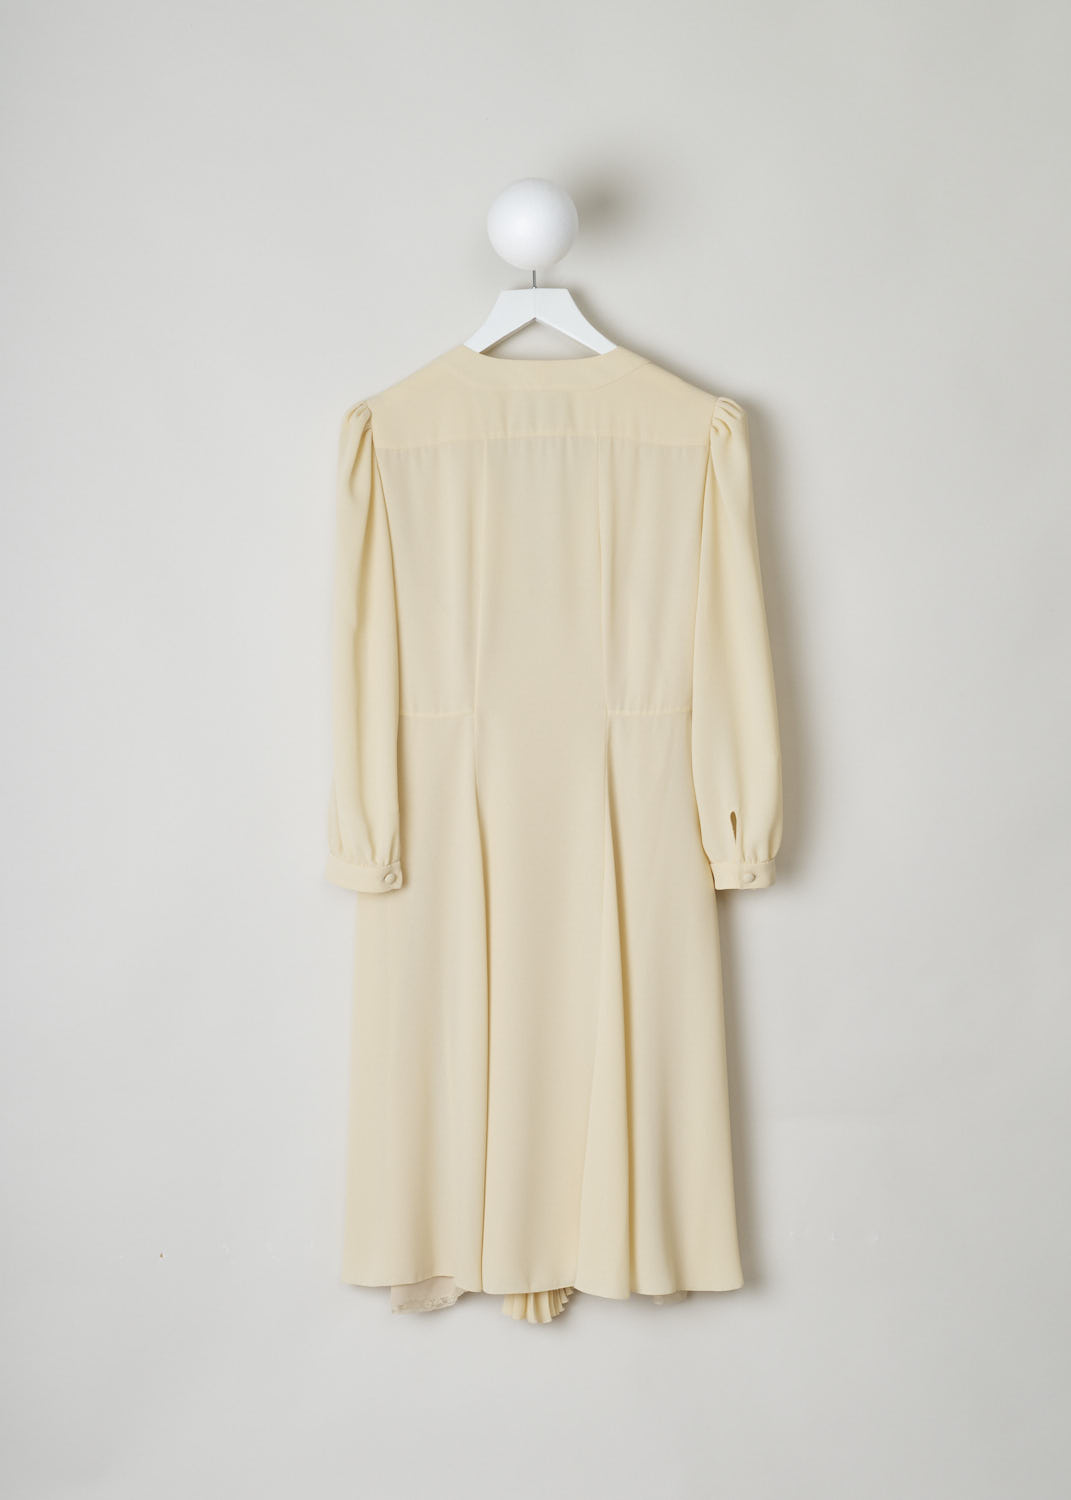 PRADA, CREAM COLORED DRESS WITH V-NECKLINE, SABLE_LEGGRO_P39W5_1WBZF0061_CREMA, Beige, Back, This feminine silk dress is made in a nude color. The dress has a plunging V-neck with on the bust a row of Dorset buttons. The dress has long sleeves with gathered shoulders. A single Dorset button can also be found on the cuffs. This dress has an empire-style waistline with on the skirt portion, a strip of accordion pleats. A concealed side zipper functions as the closure option. The dress comes with a matching nude slip dress with lace detailing.
